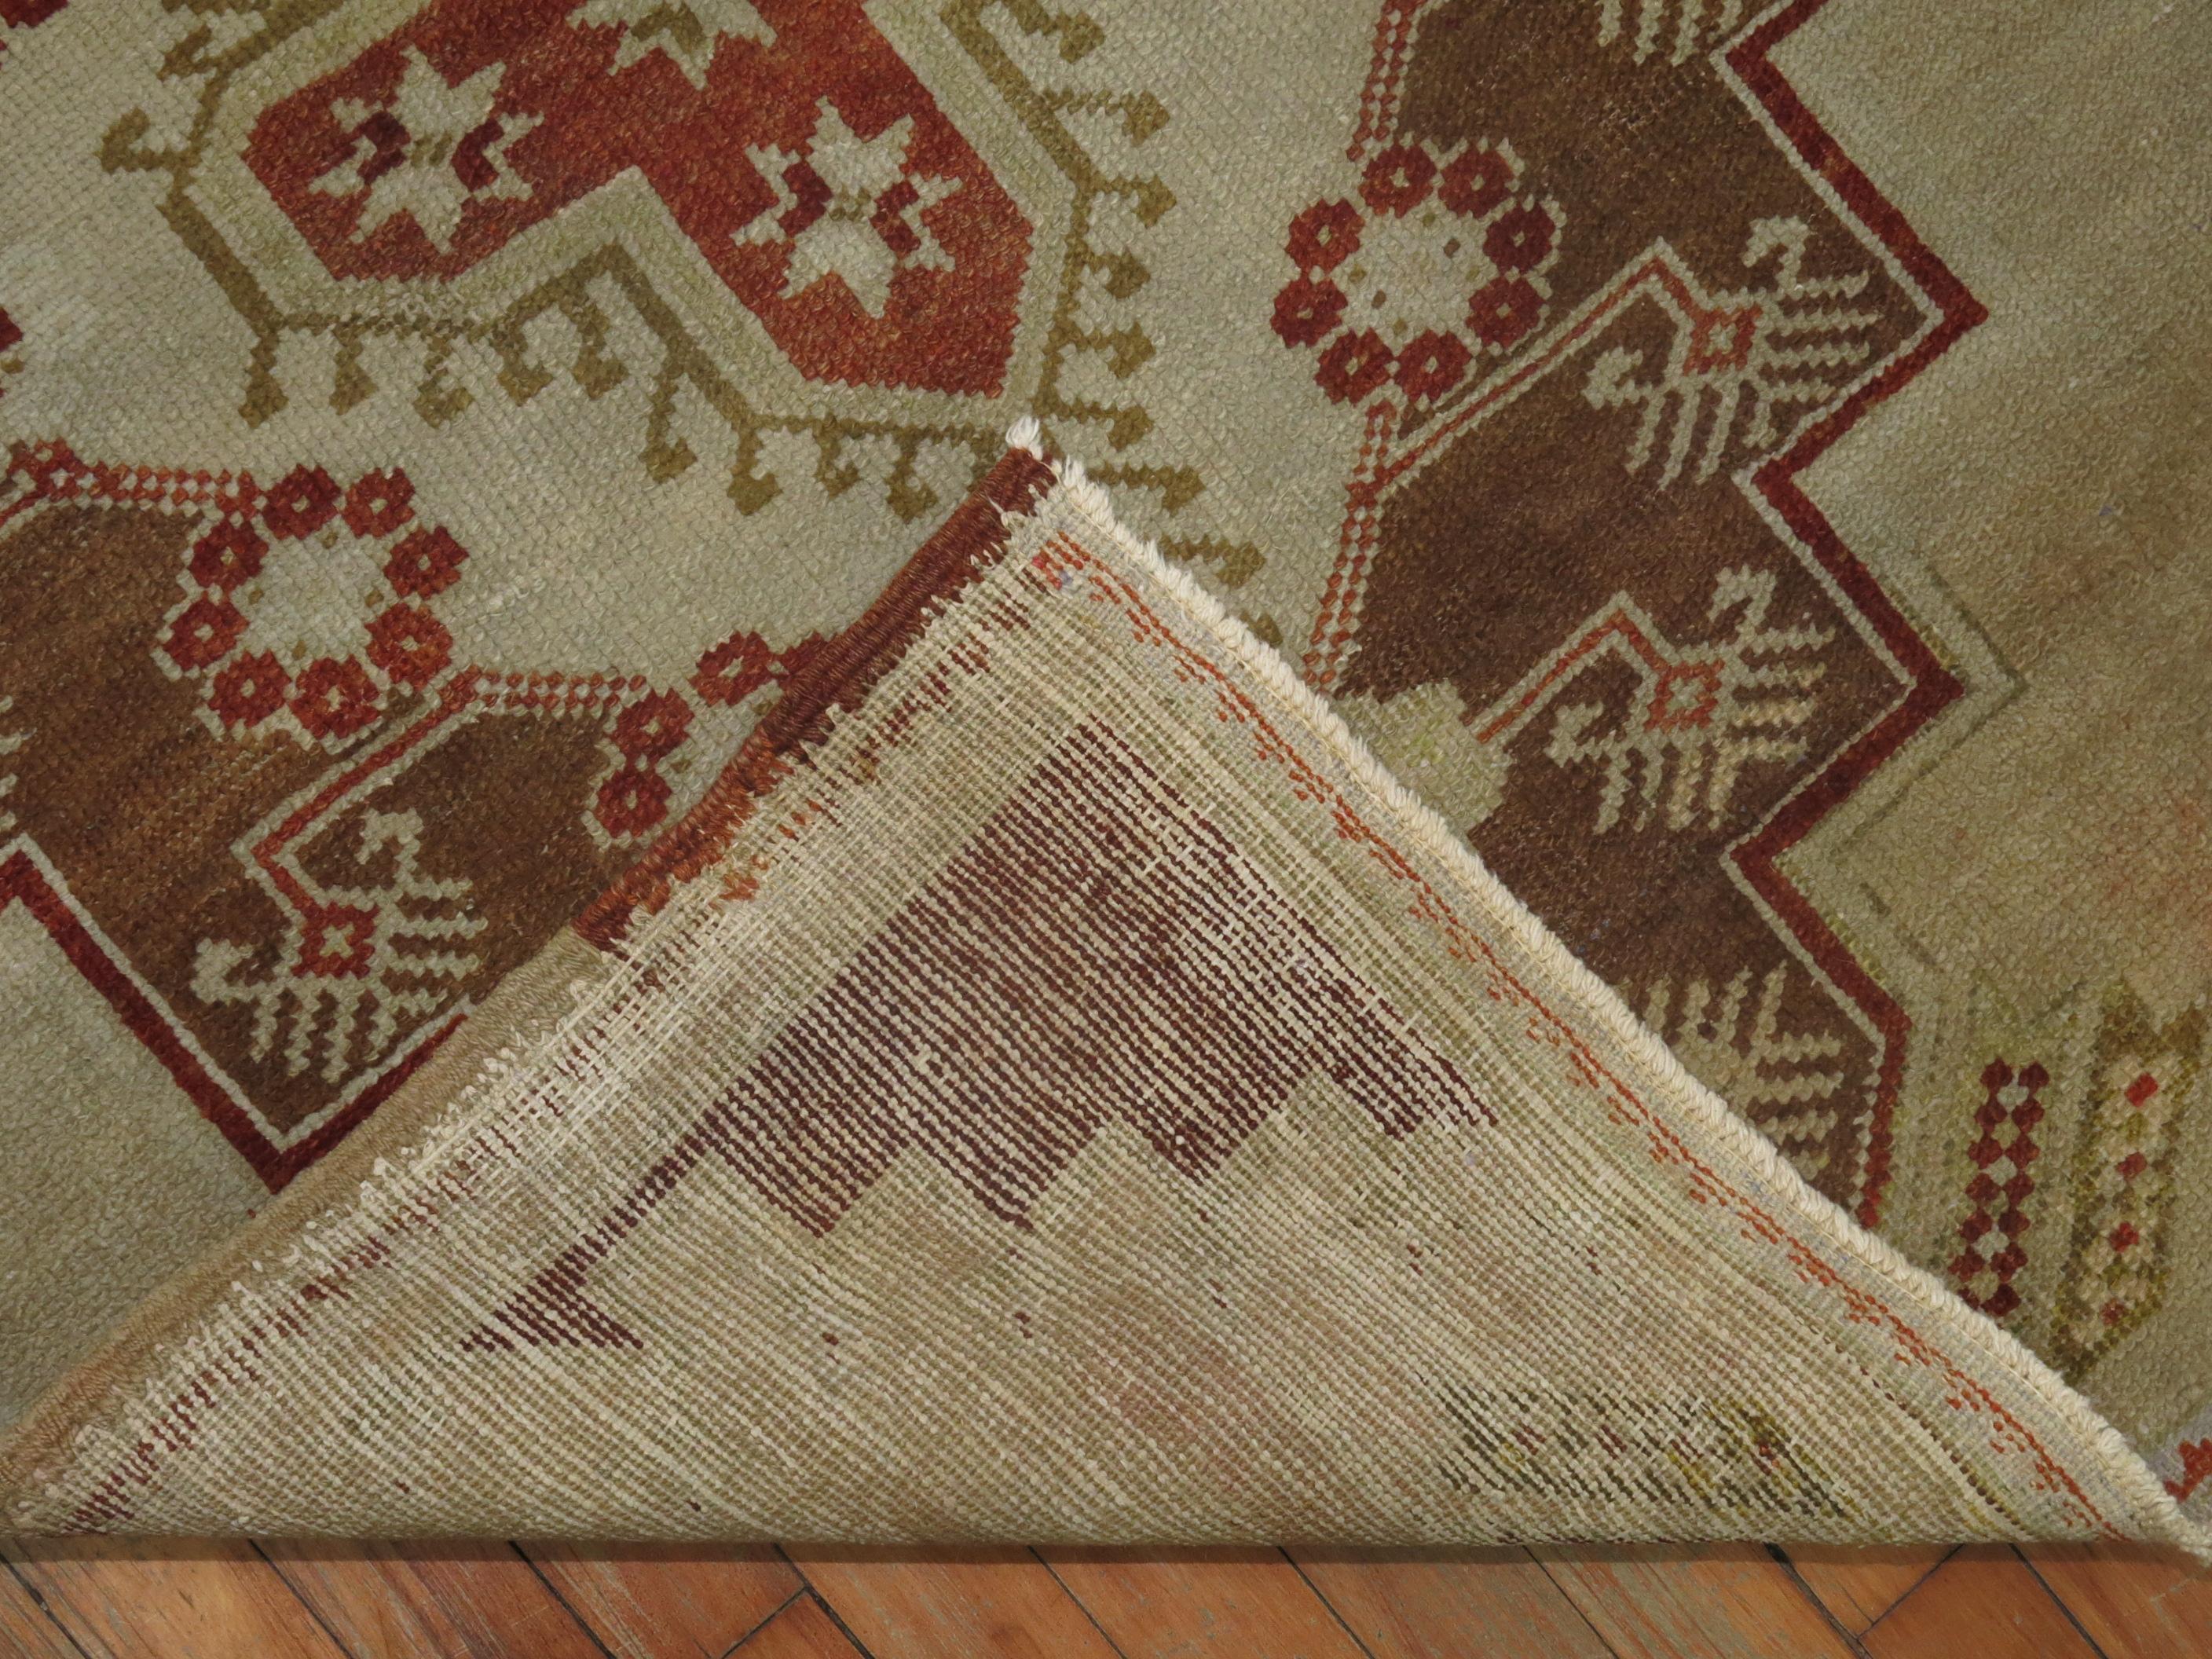 Vintage Turkish Oushak rug in burnt reds, brown accents on a camel field.